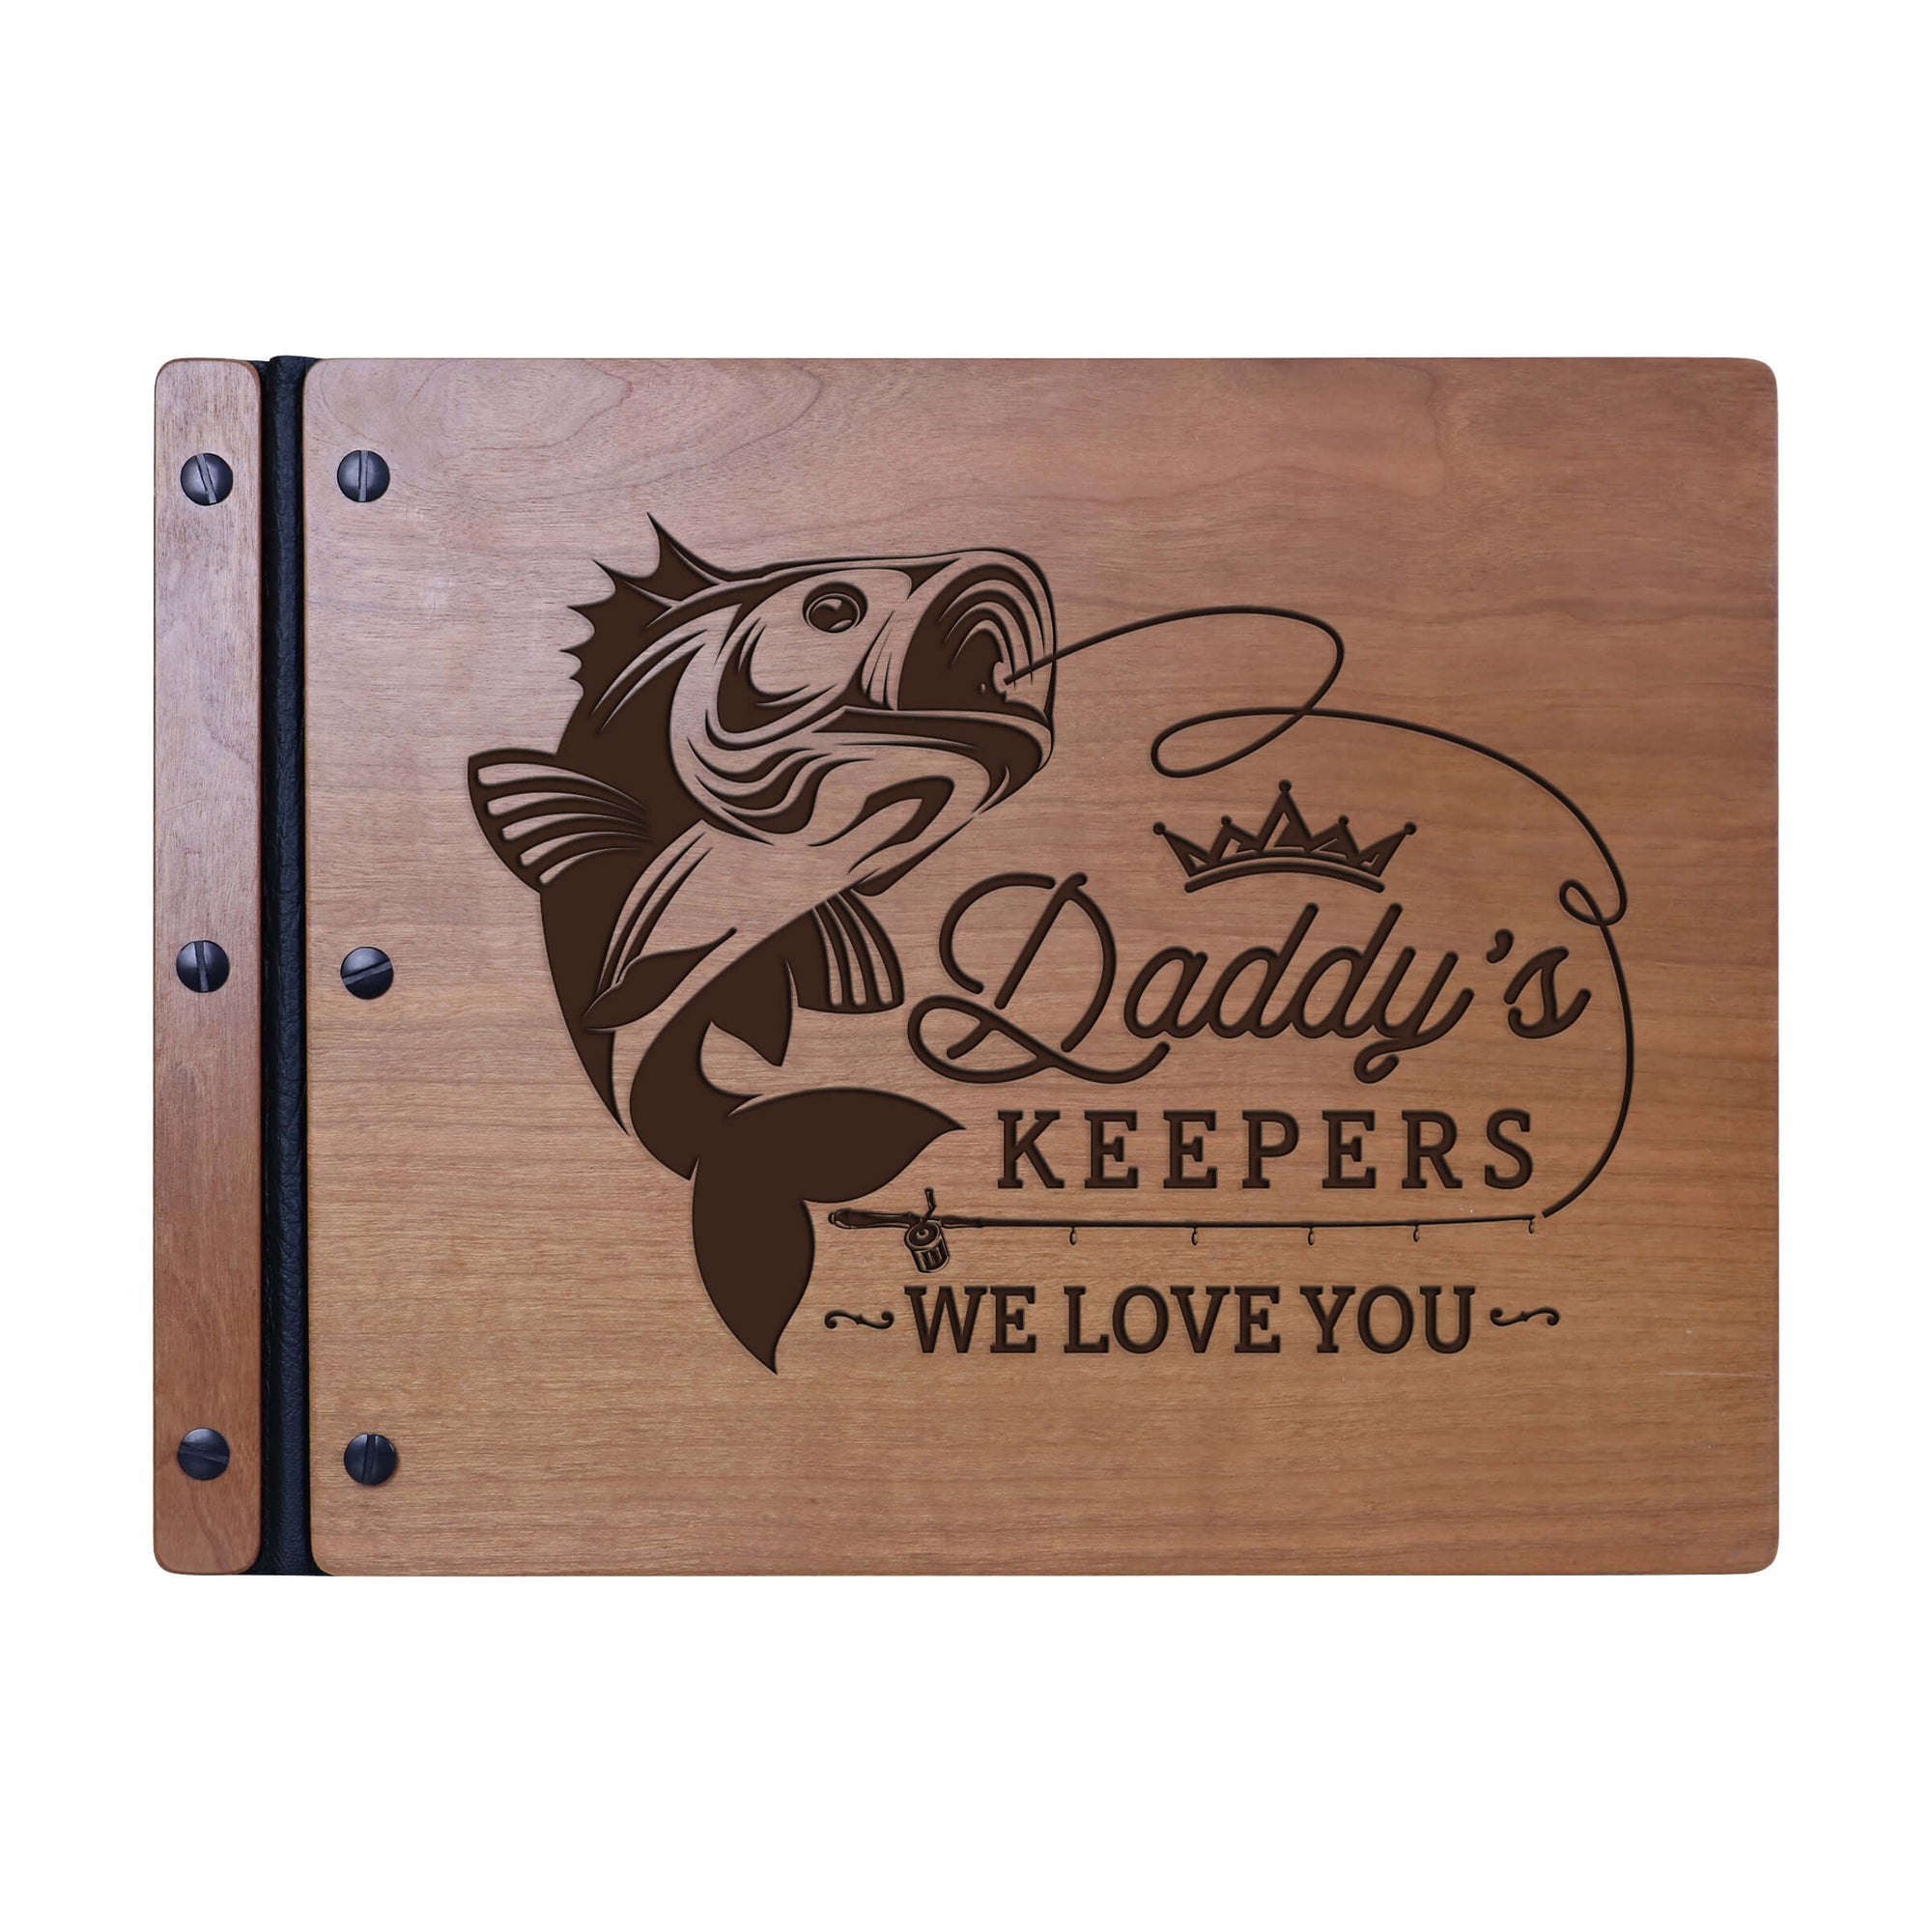 Wooden Memorial Large Guestbook with Fisherman Verse for Funeral Service - Daddy's Keepers